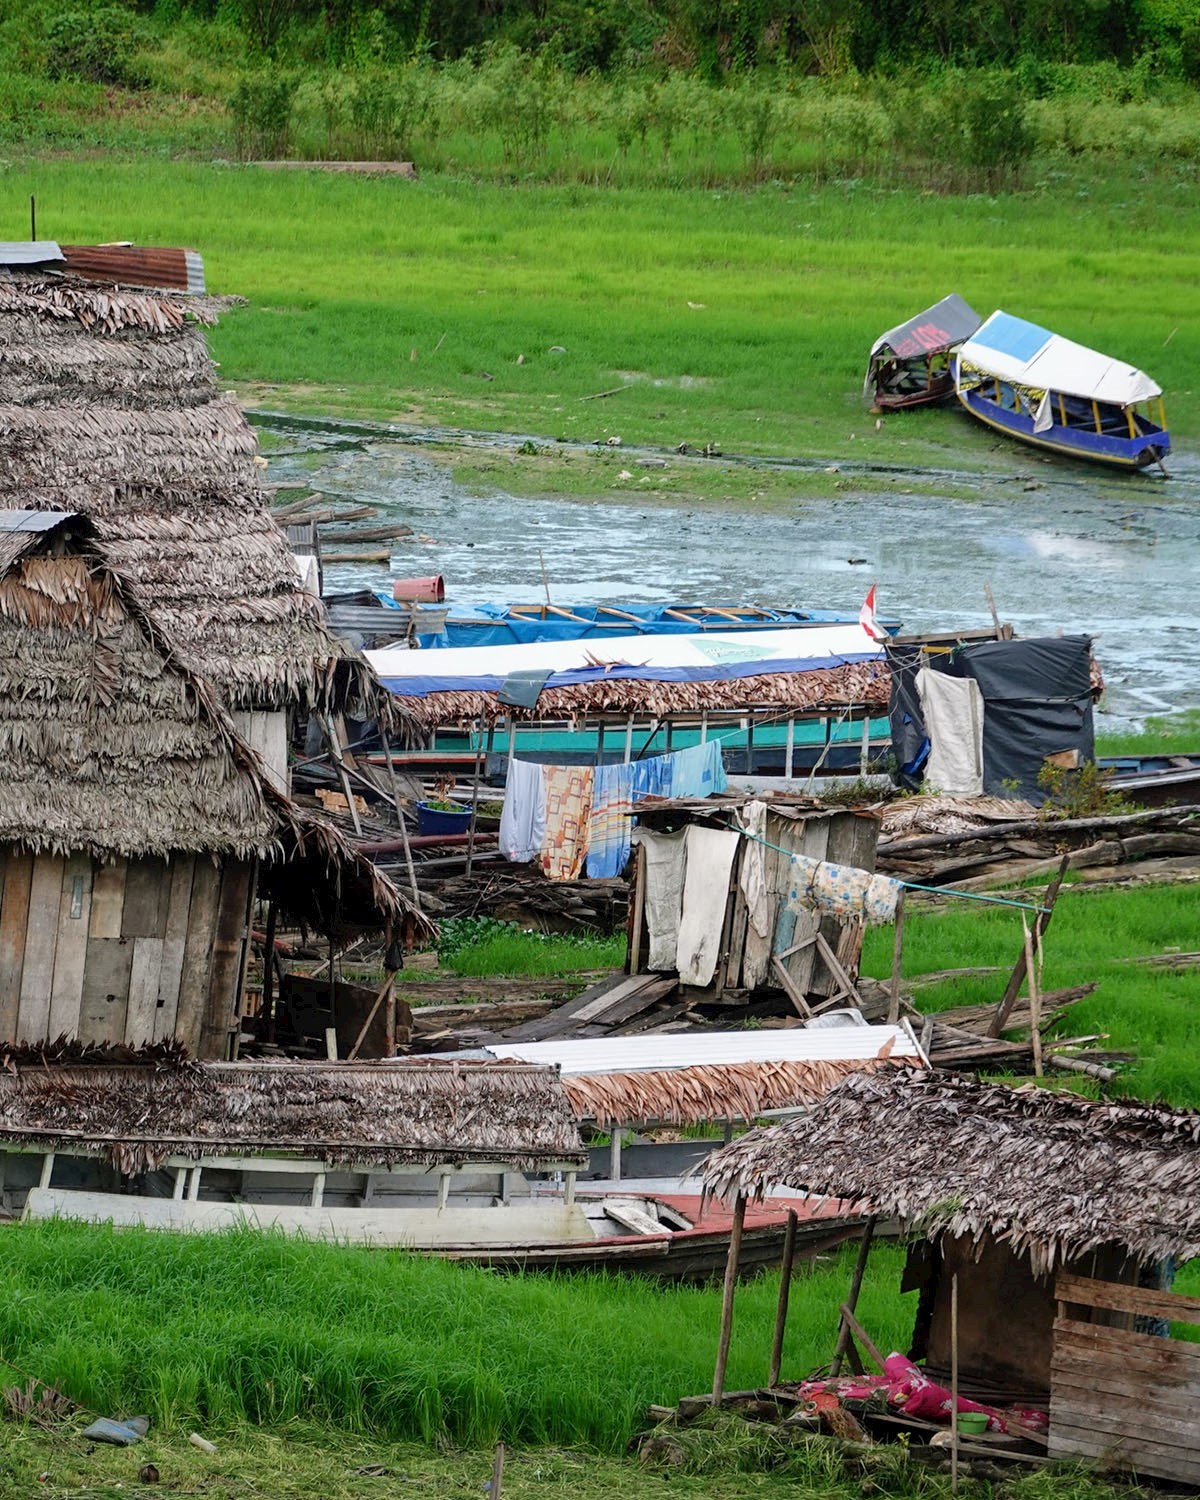 One of the many small communities along the Amazon River - 